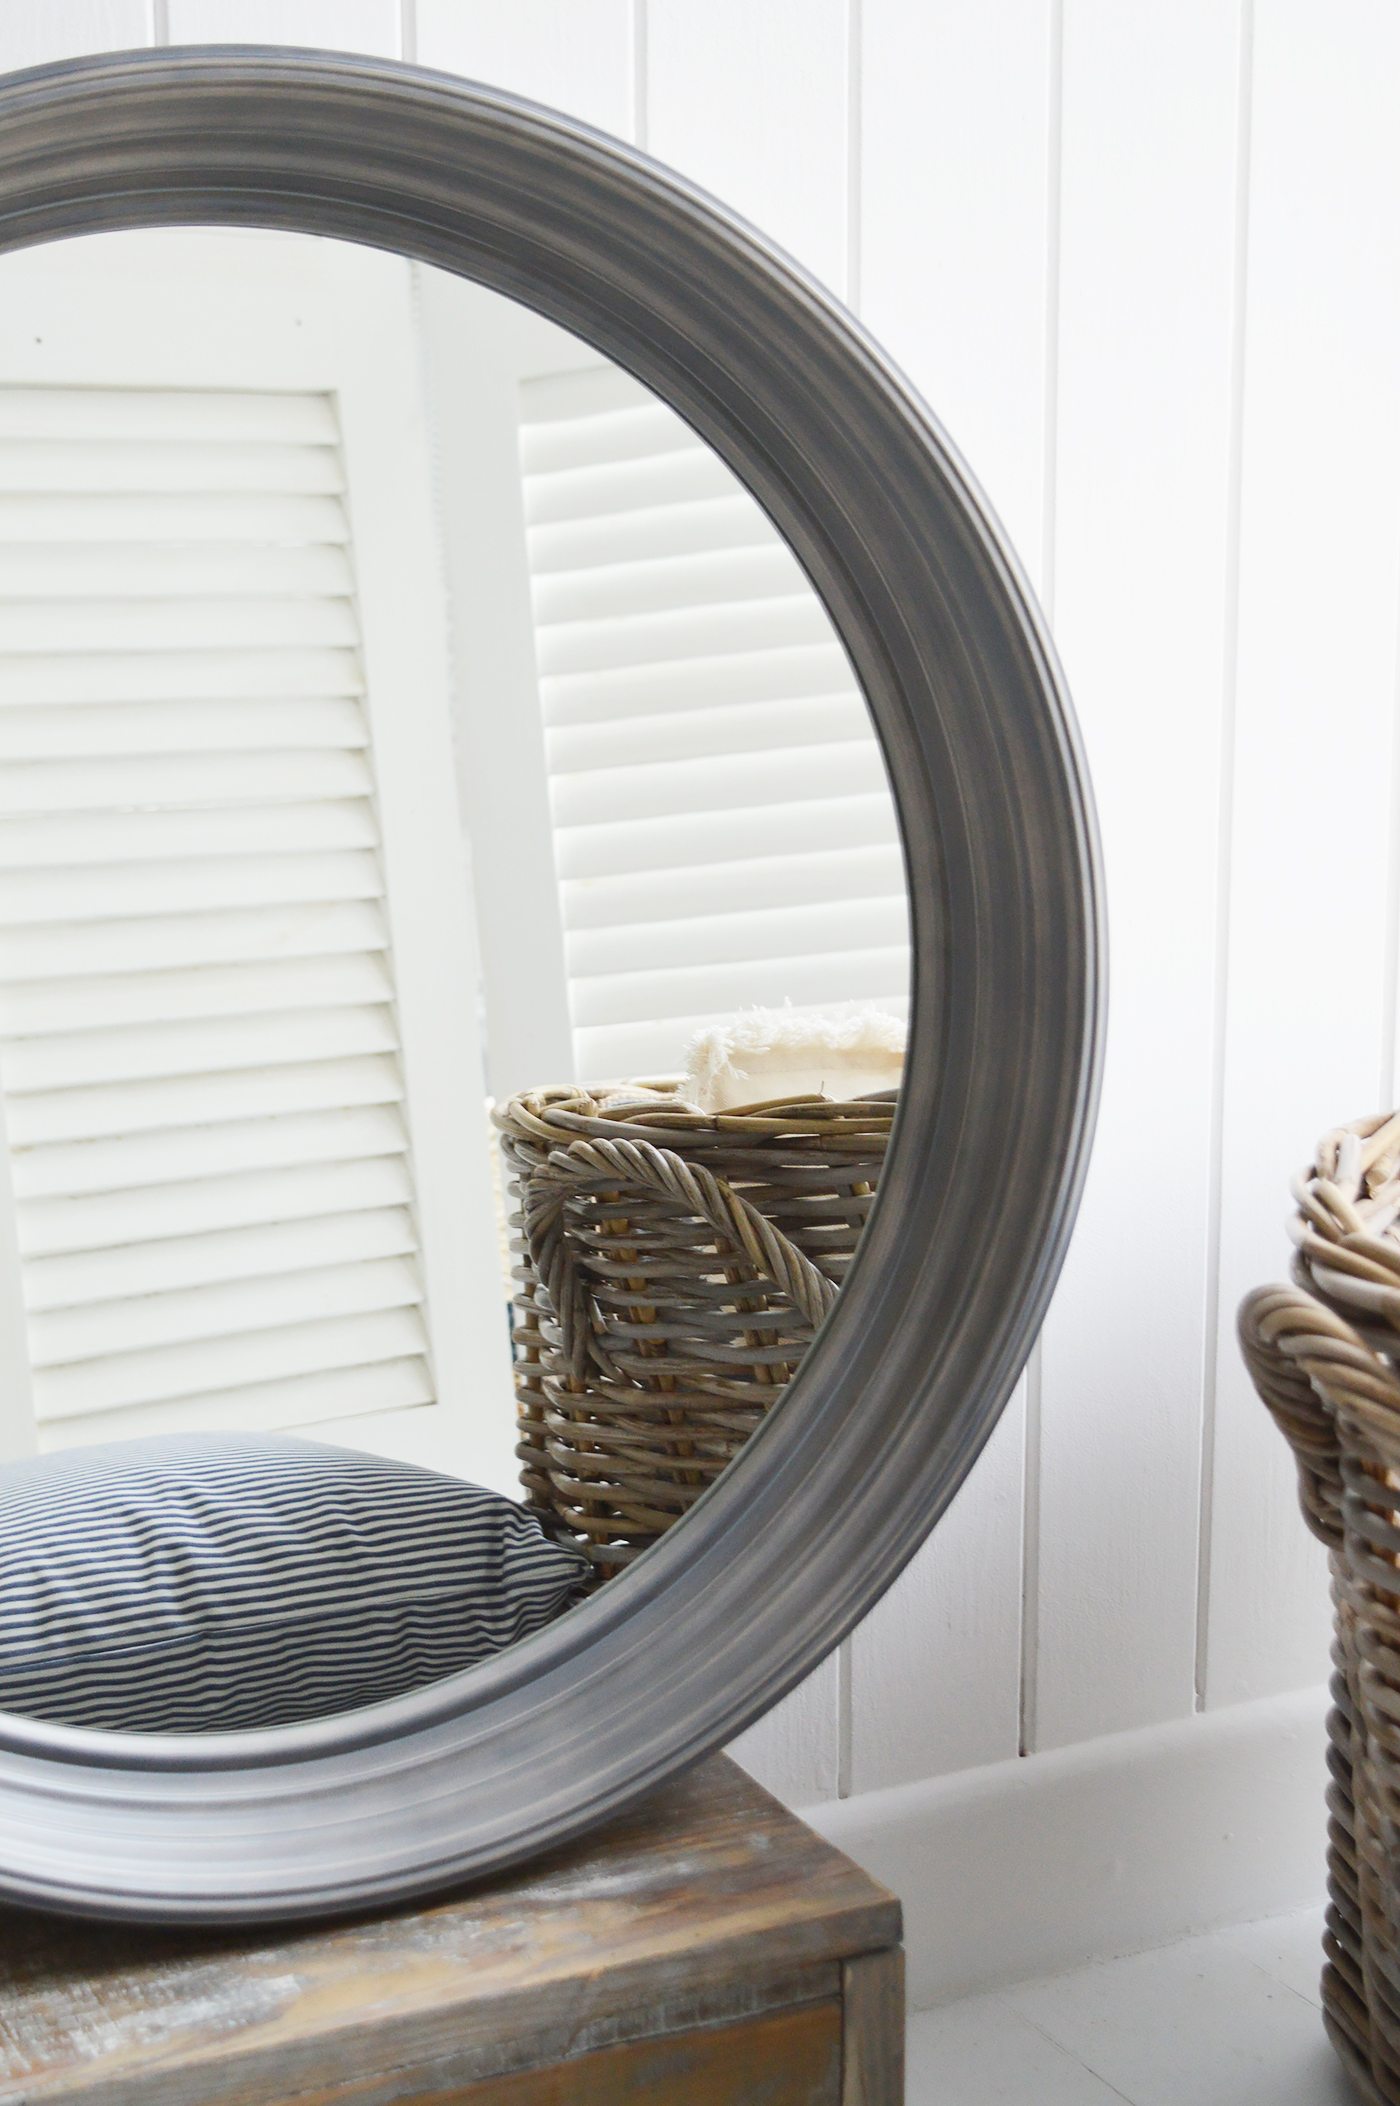 Hudson Grey Round large mirror for New England country, coastal and white home interiors. New England Furniture and Interiors